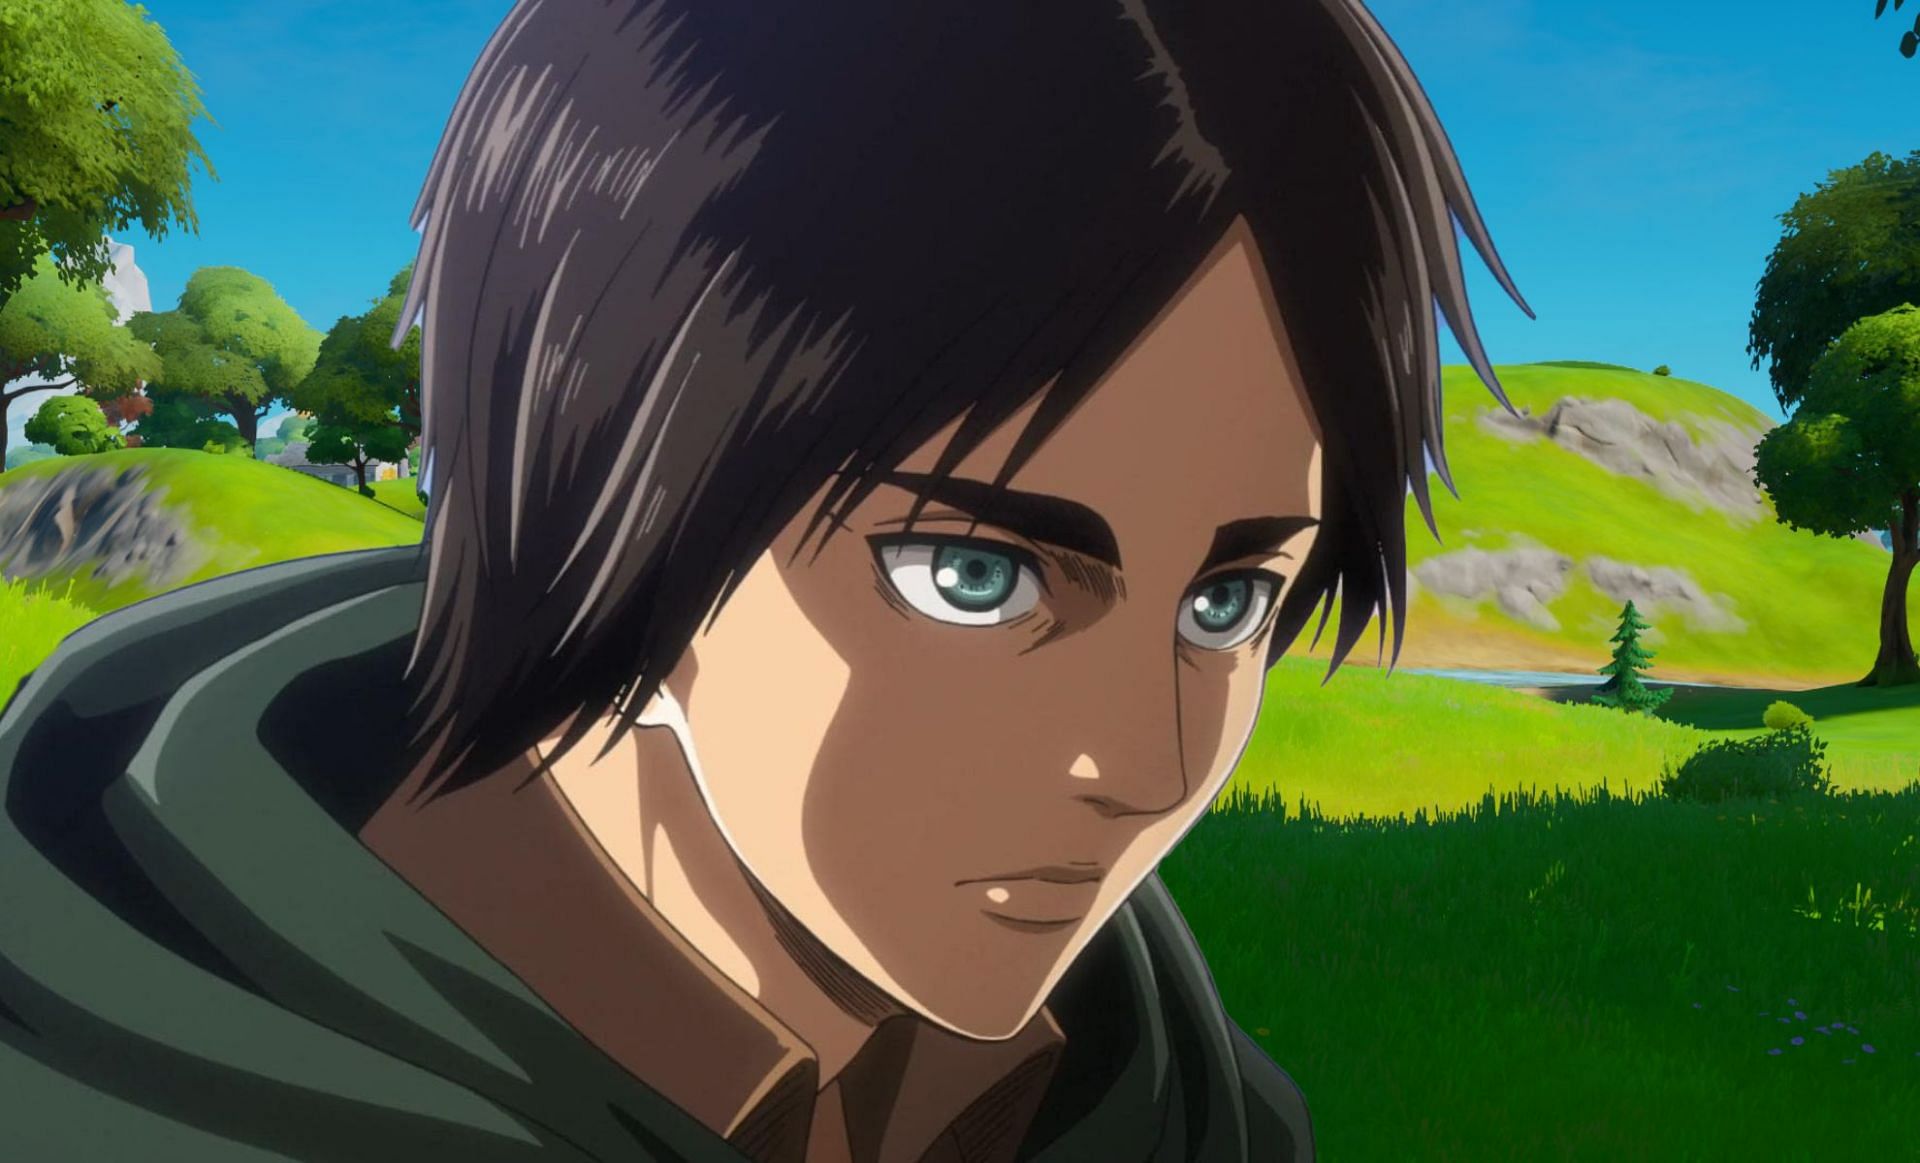 Is Eren Yeager coming? (Image via Epic Games)